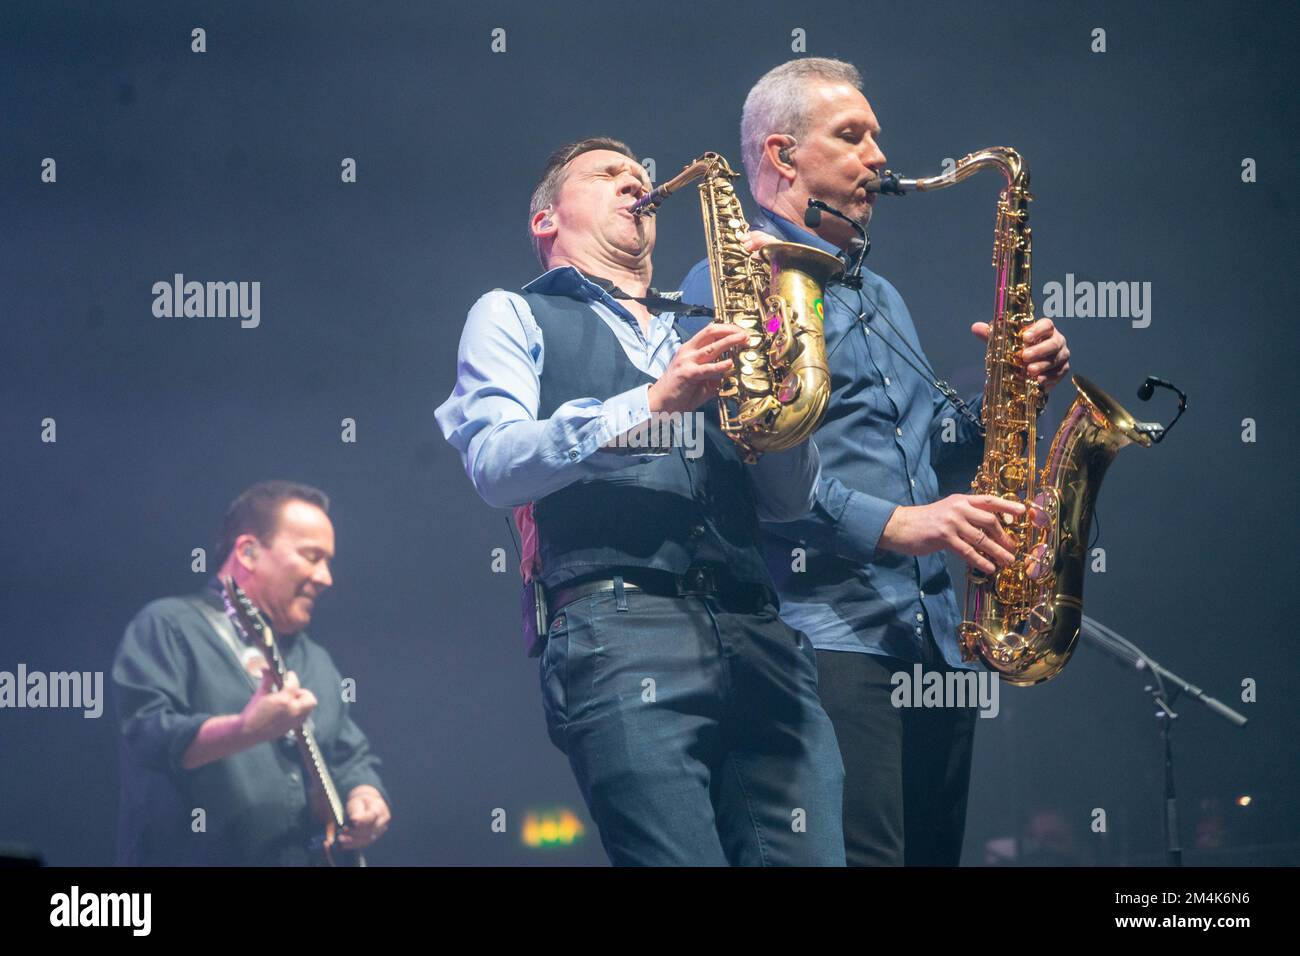 London, UK. Wednesday, 21 December, 2022. UB40 performing at the OVO Wembley Arena in London. Photo: Richard Gray/Alamy Live News Stock Photo